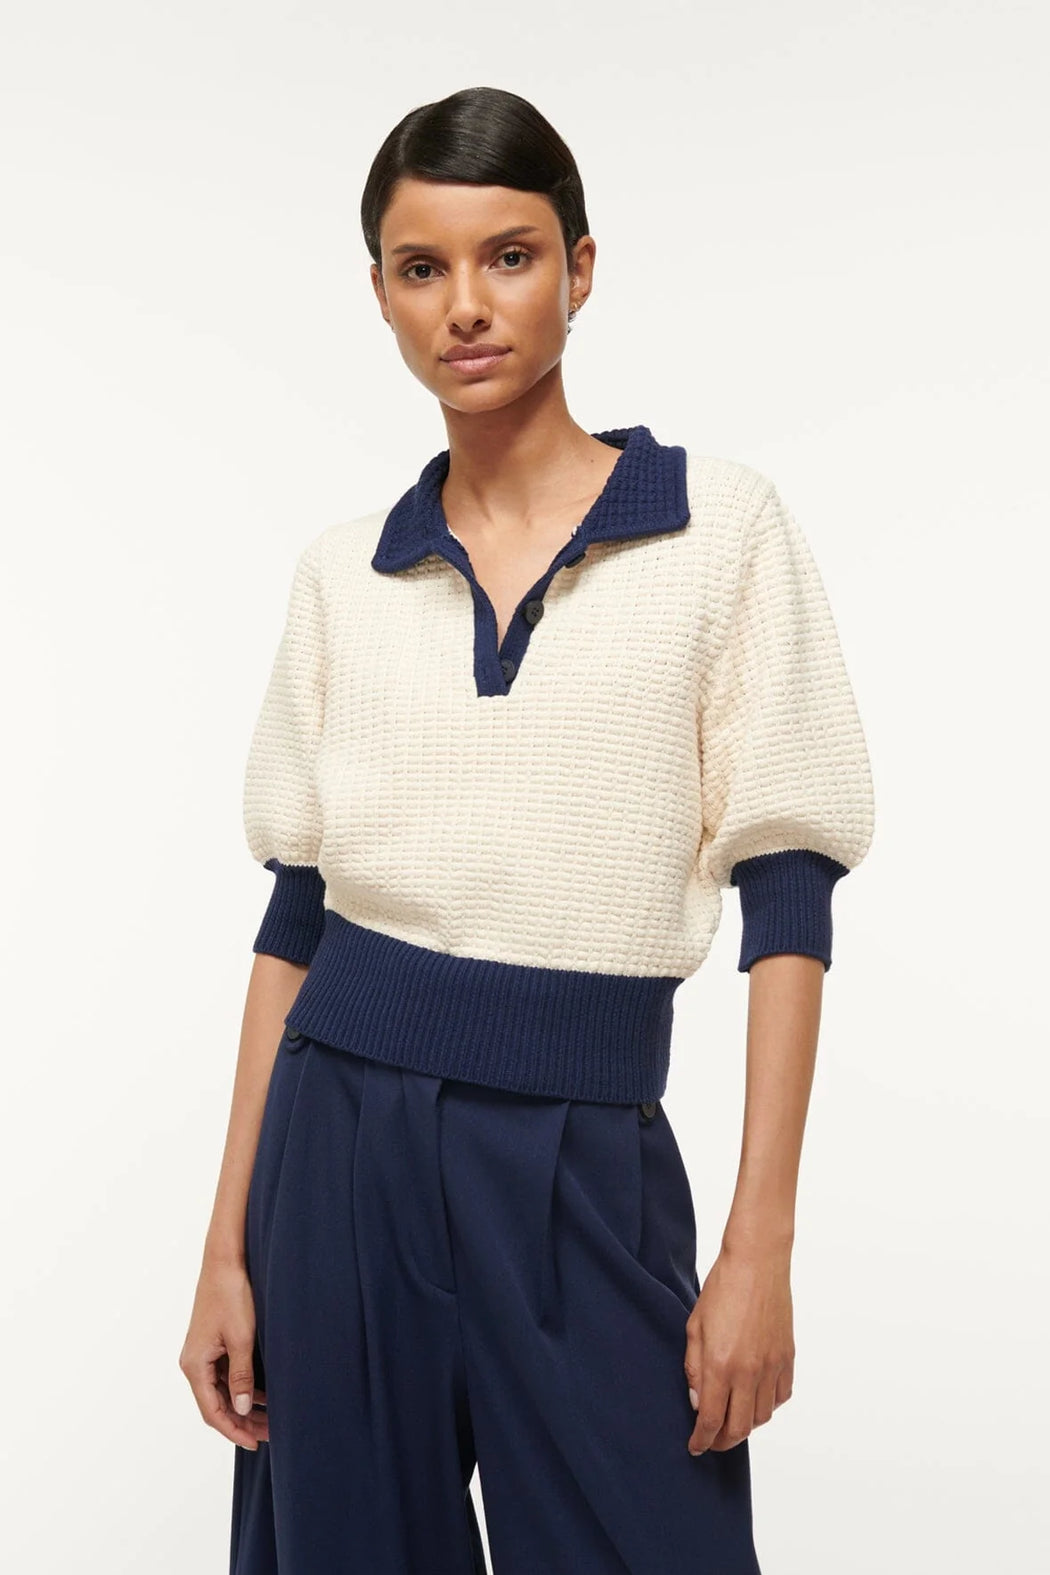 Staud - Altea Sweater in Ivory and Navy